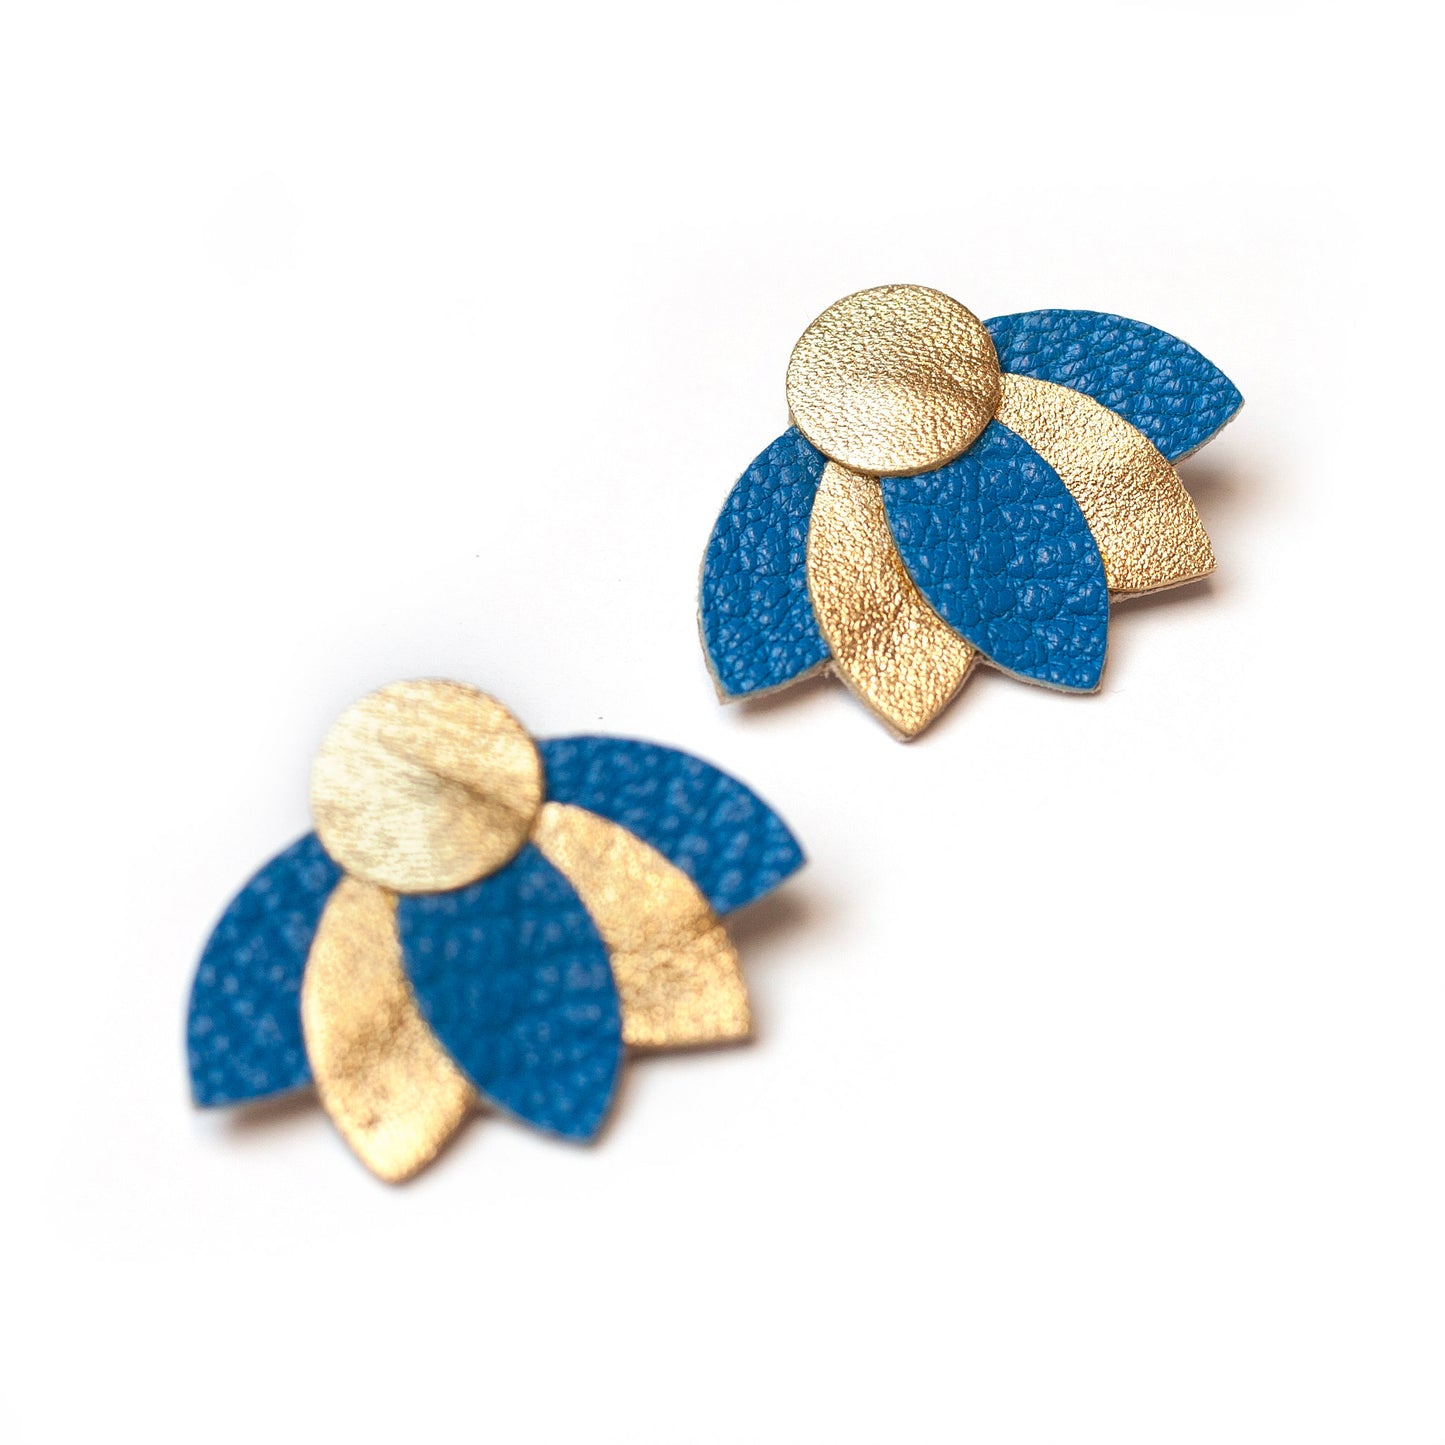 Flower earrings in blue and gold leather